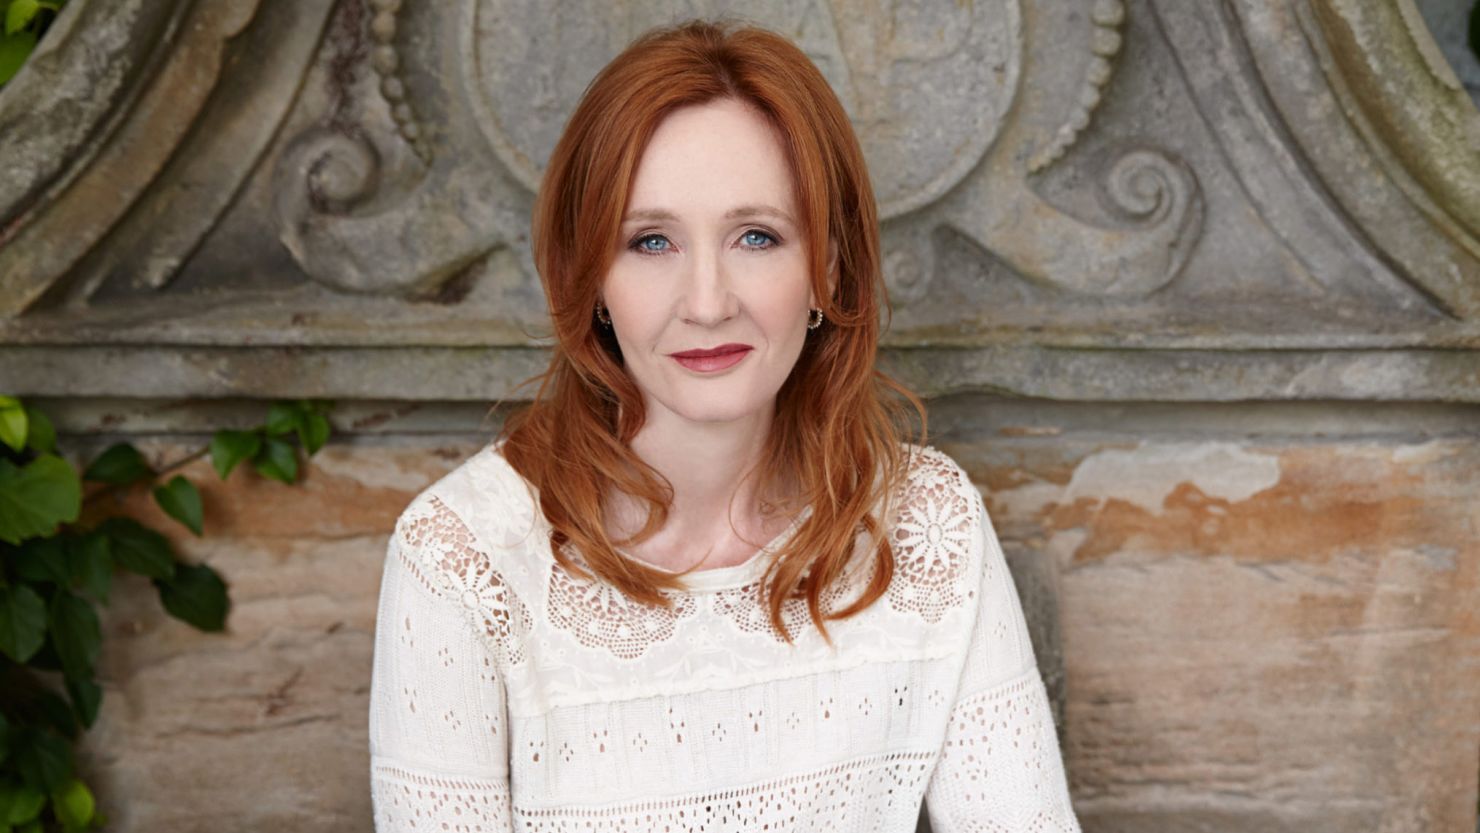 J.K. Rowling, author of the "Harry Potter" books, has caused controversy with her views on transgender people.